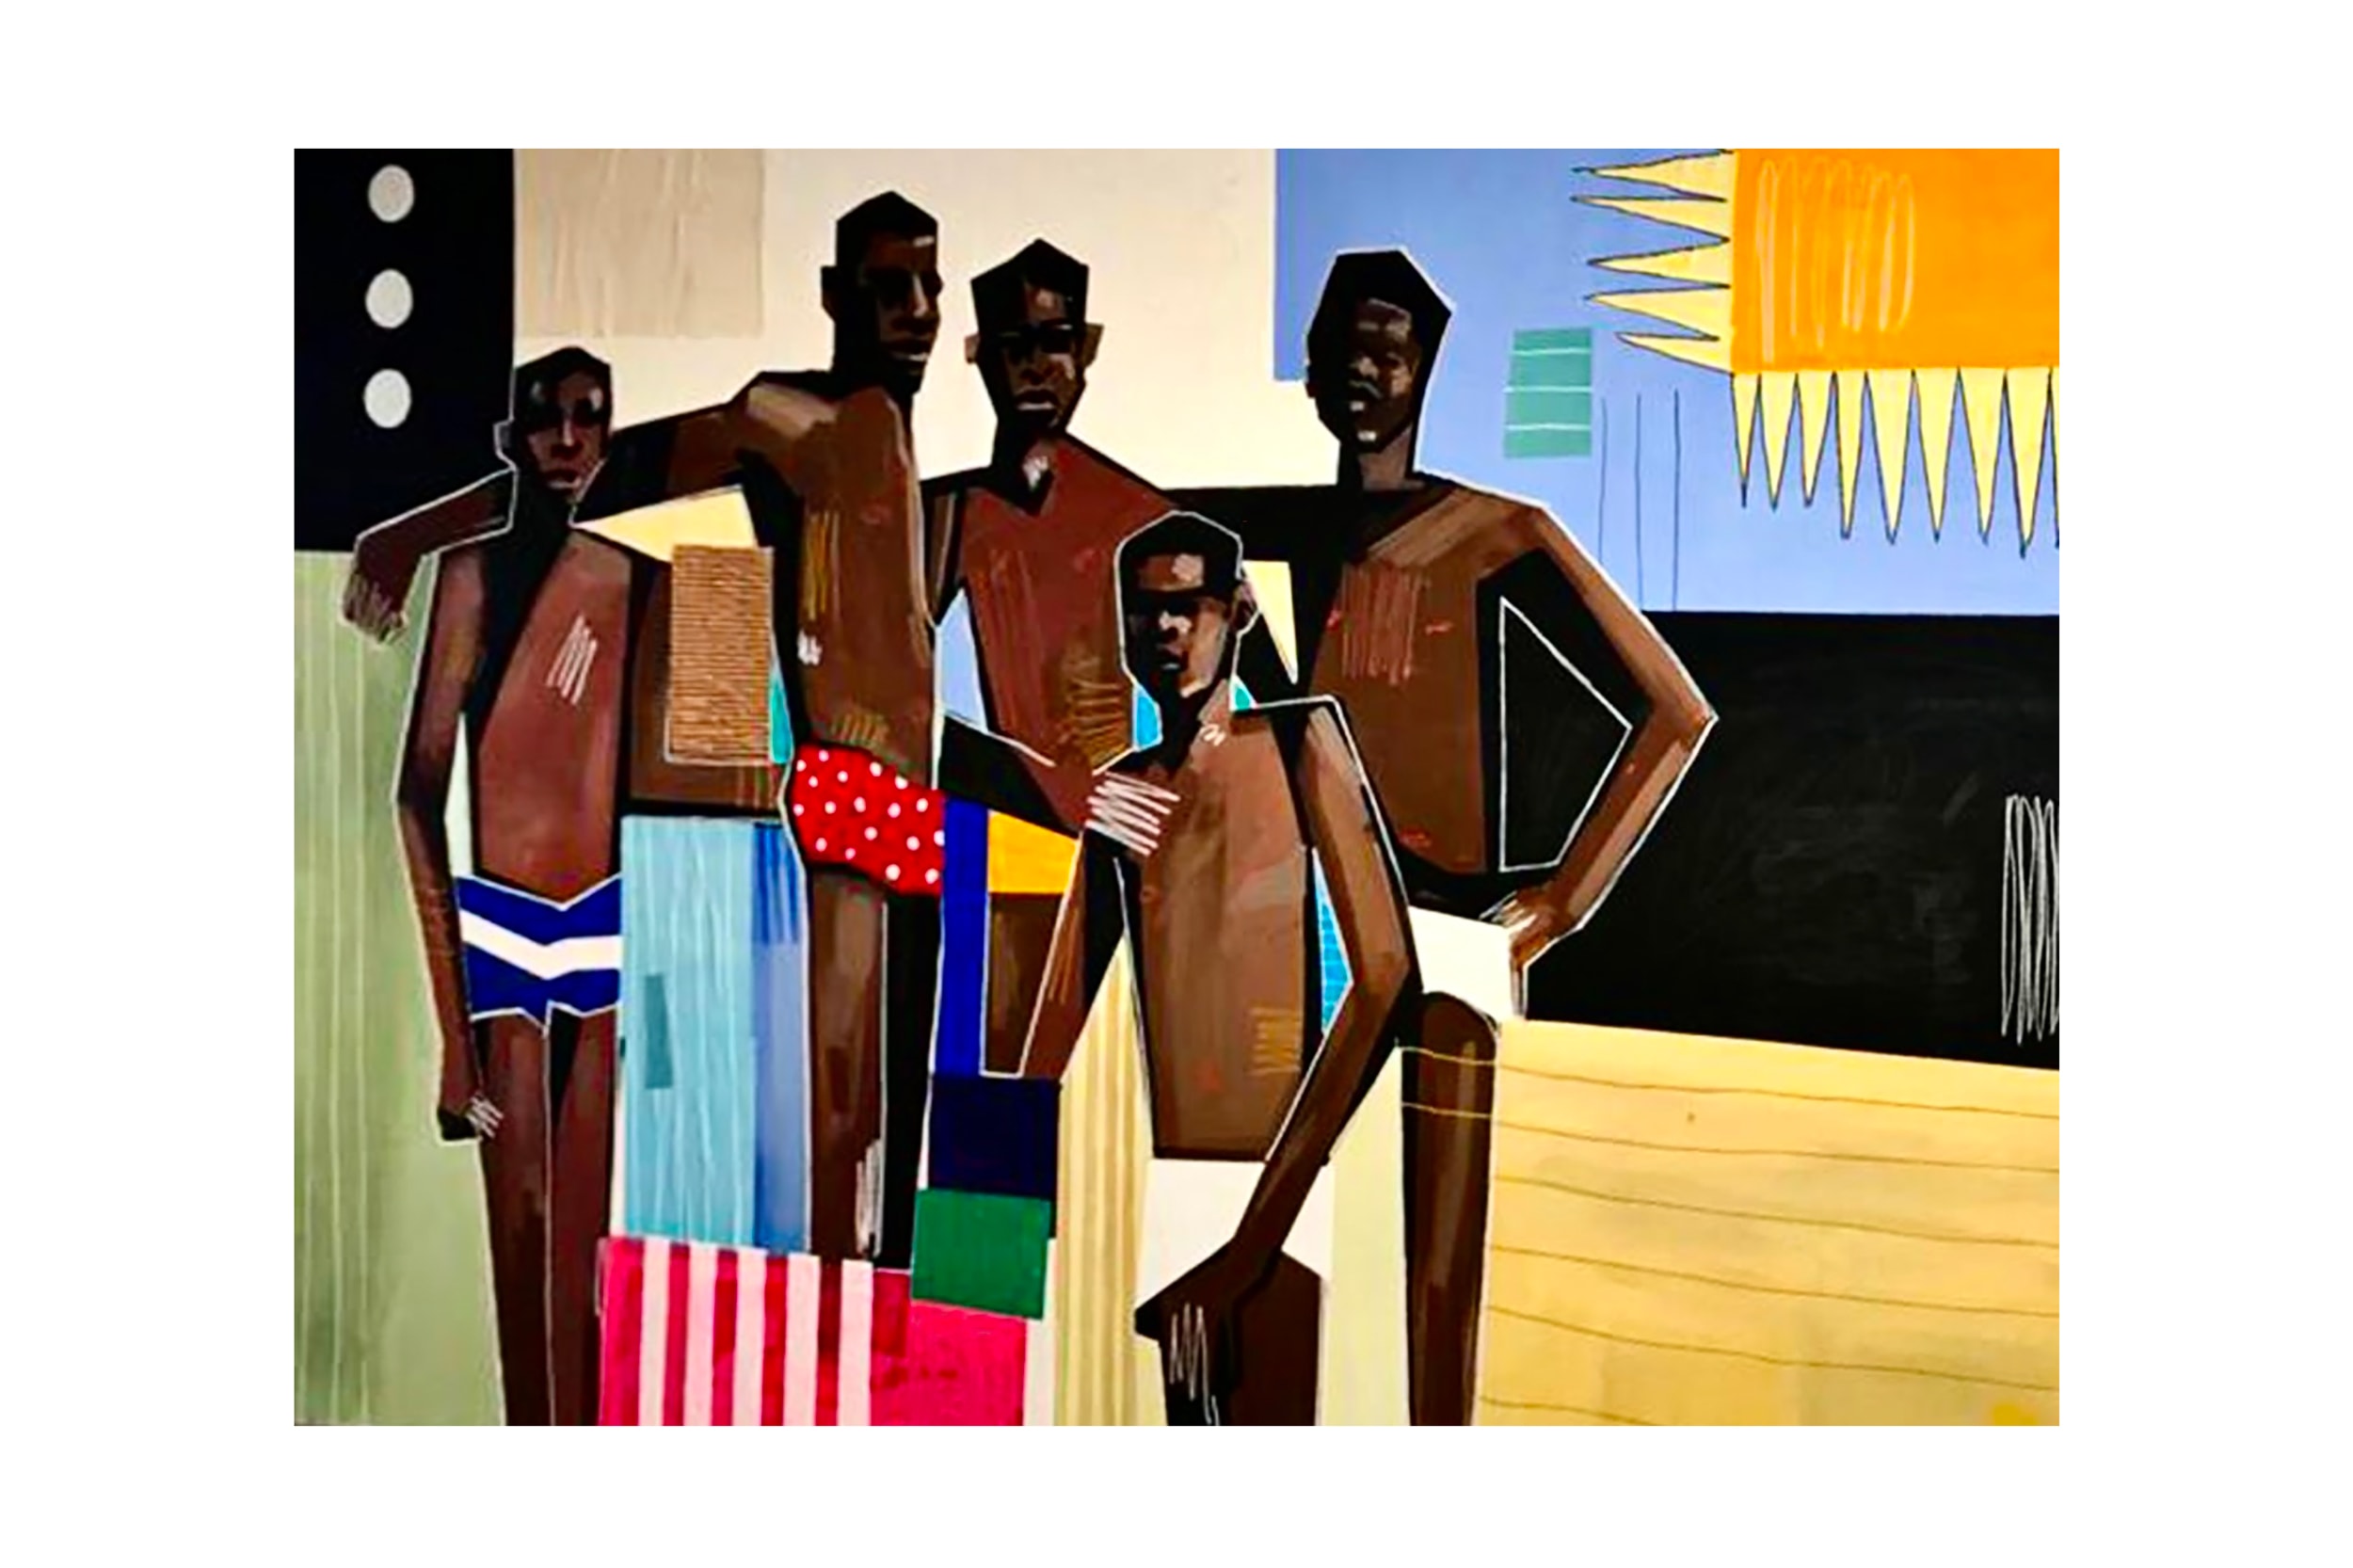 contemporary african art fair artwork exhibitions paintings sculptures installations